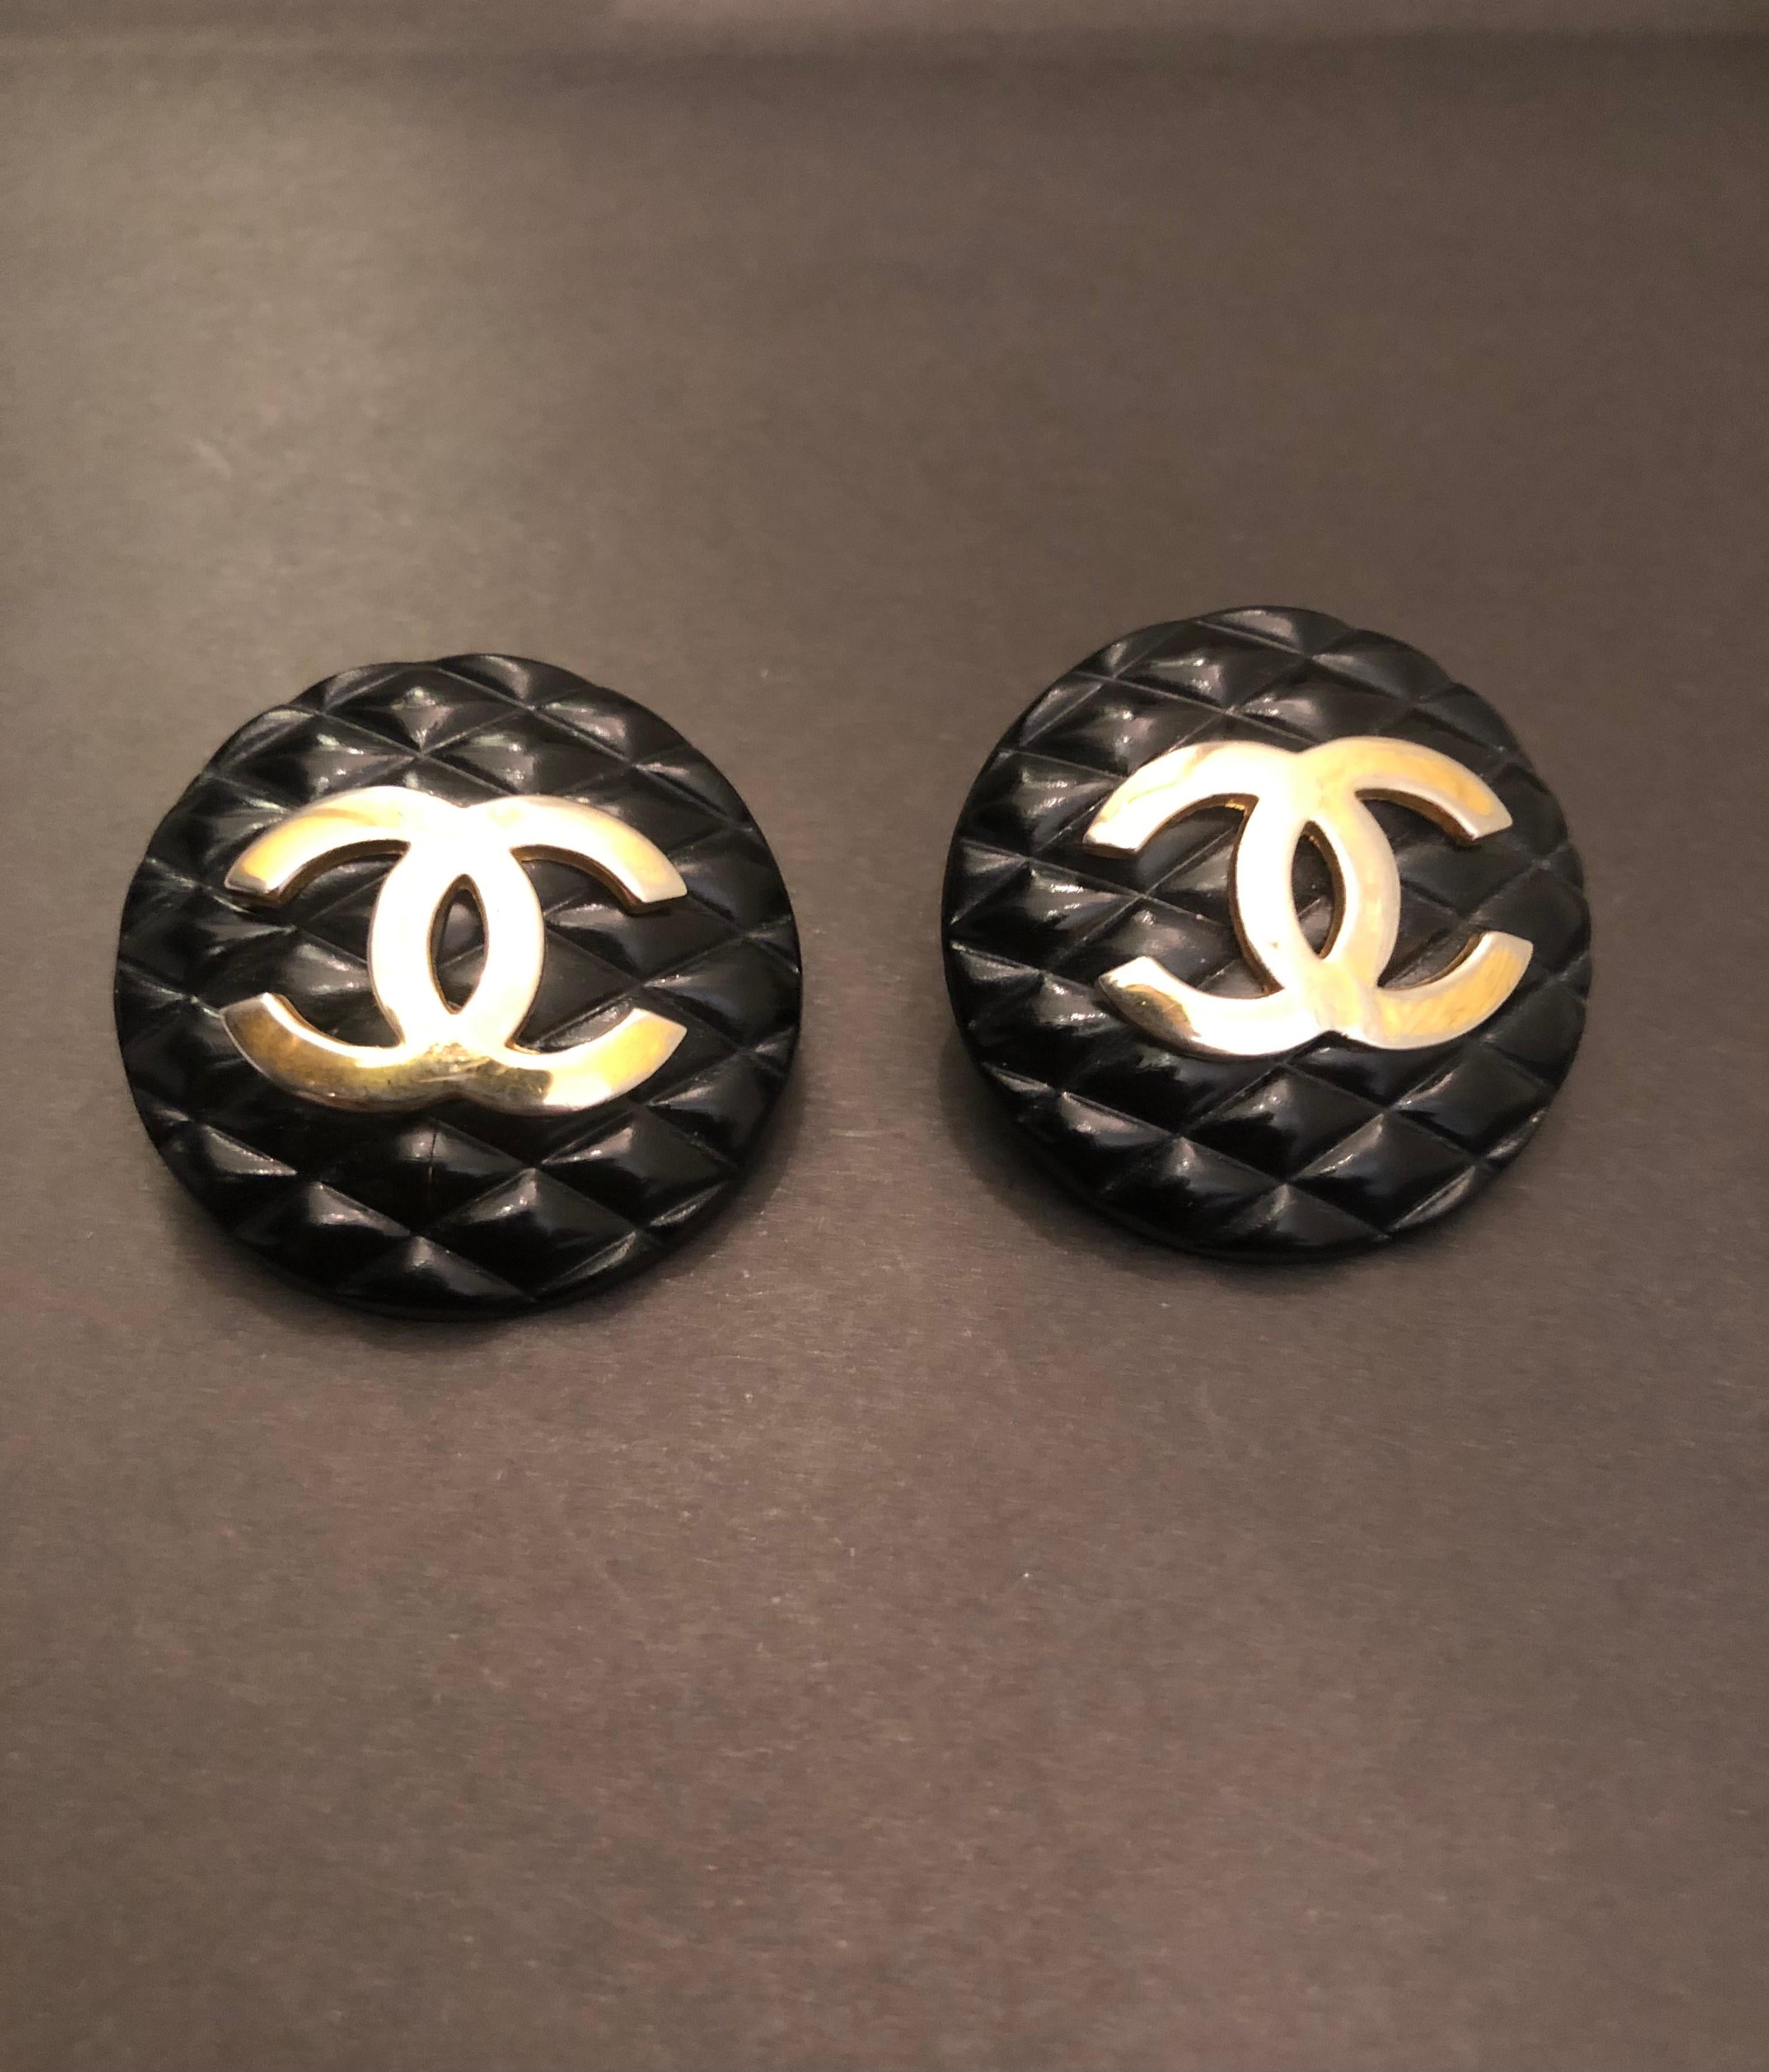 These 1980s vintage CHANEL massive button earrings are crafted of black resin in quilted pattern featuring a gold toned CC at the center. Stamped CHANEL 23 made in France. Measures approximately 3.4 cm in diameter. Come with box.

Condition - Good